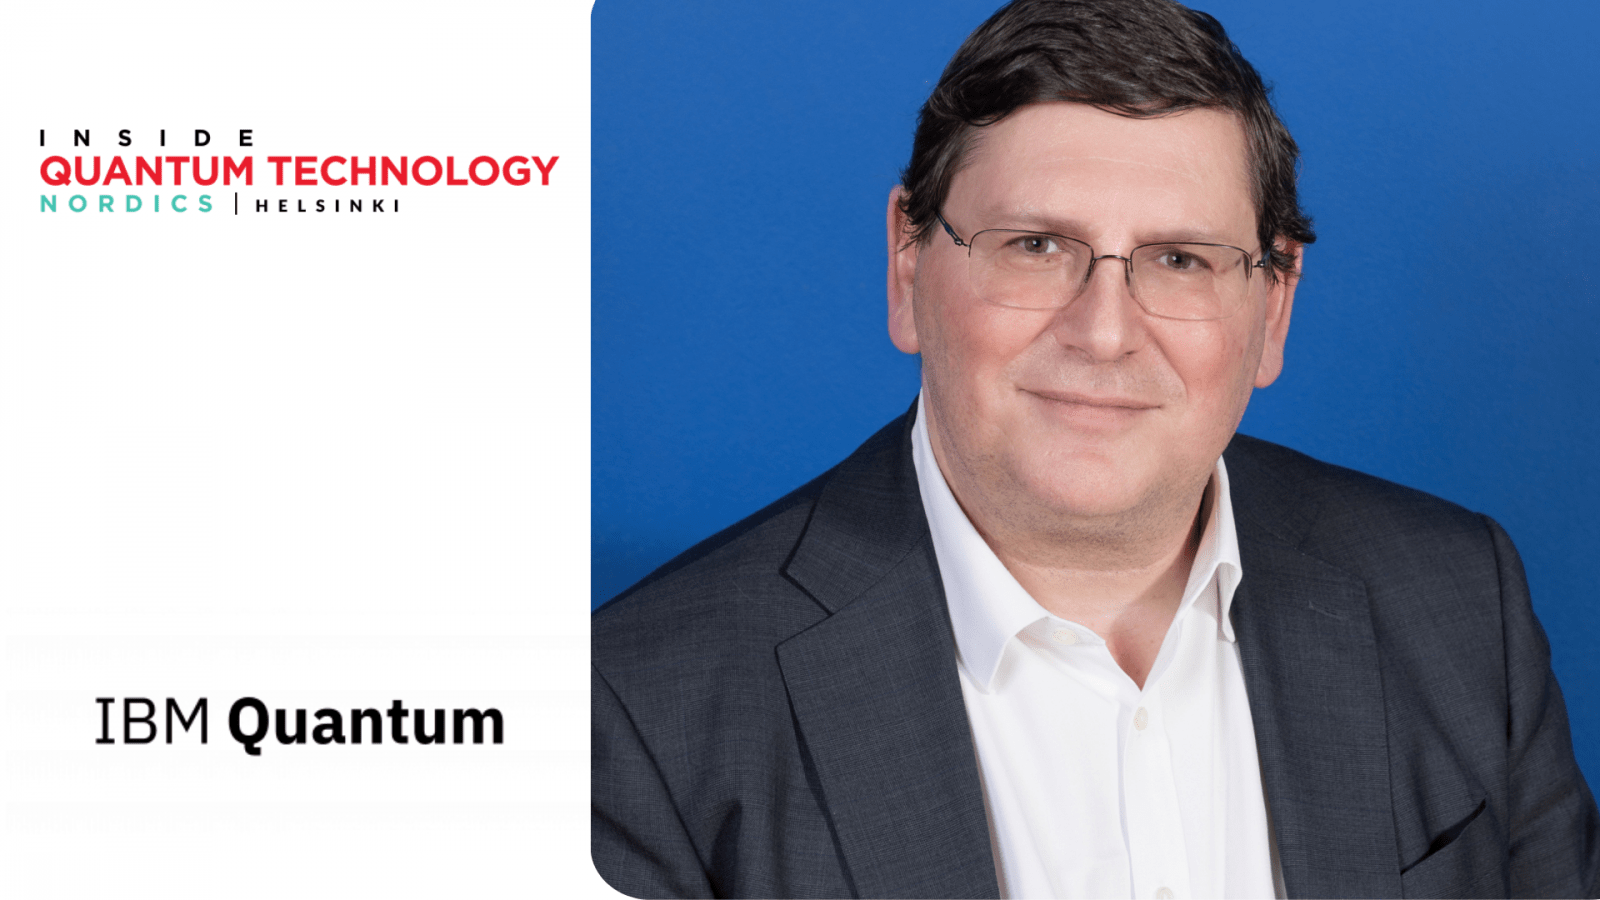 Adam Hammond, Manager of IBM Quantum EMEA, APAC & Japan is an IQT Nordics 2024 Speaker for the event in Helsinki